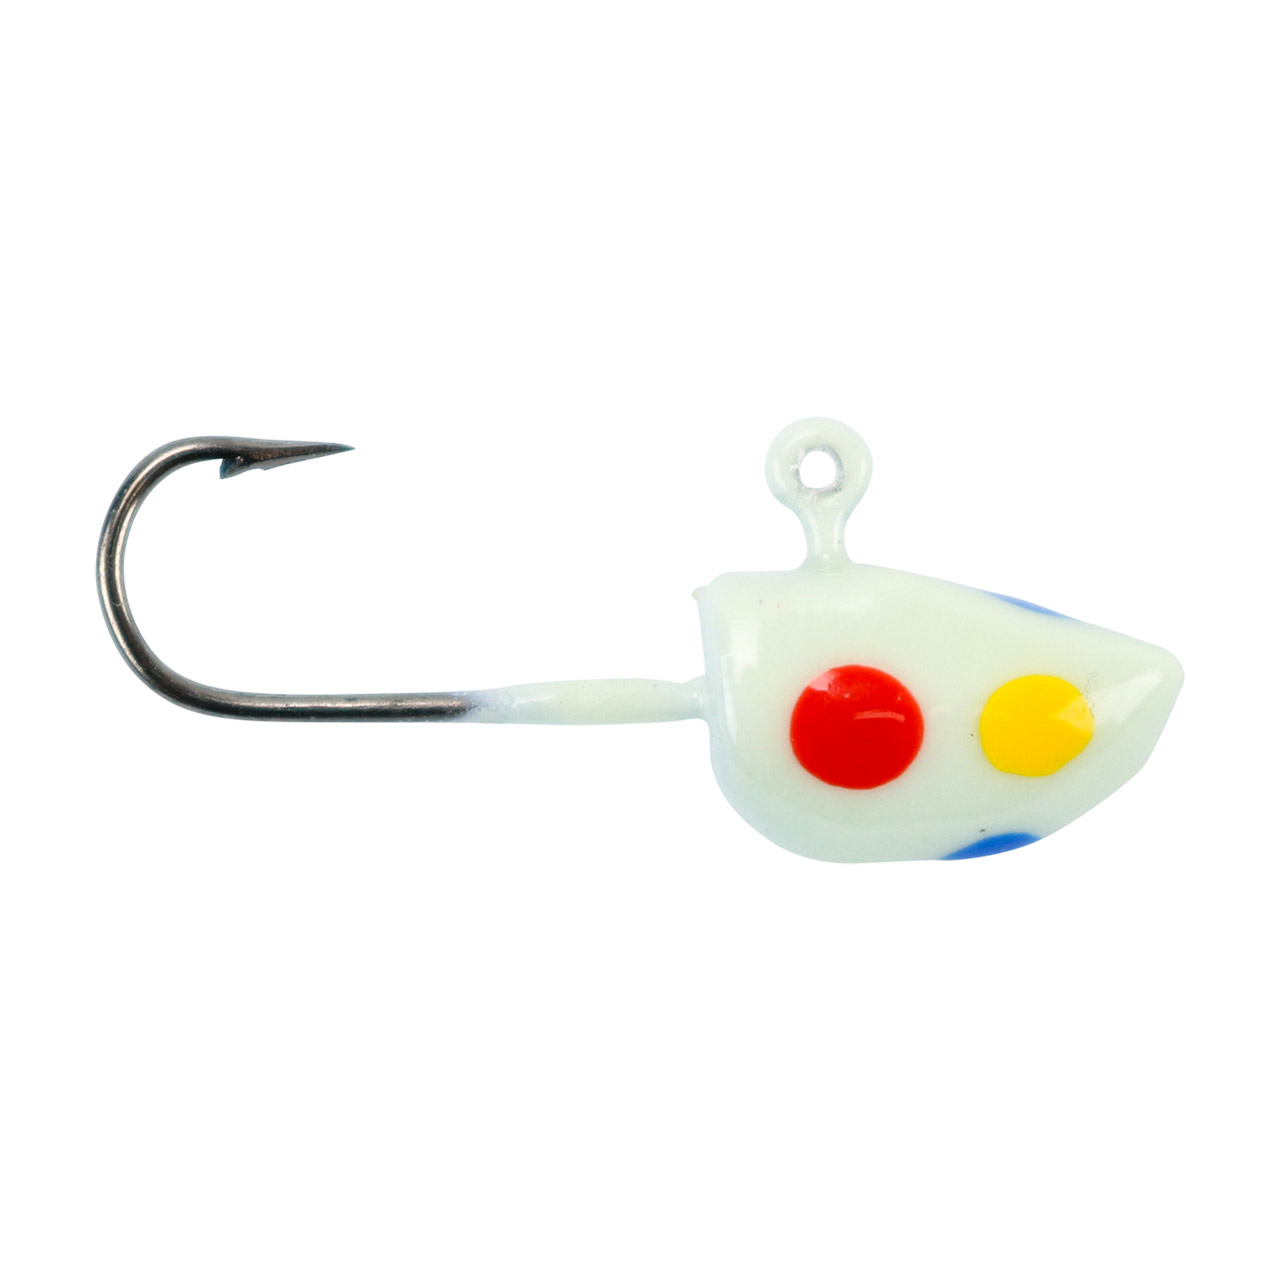 3/4 Tungsten Gold Jigging Spoon - The Perfect Jig